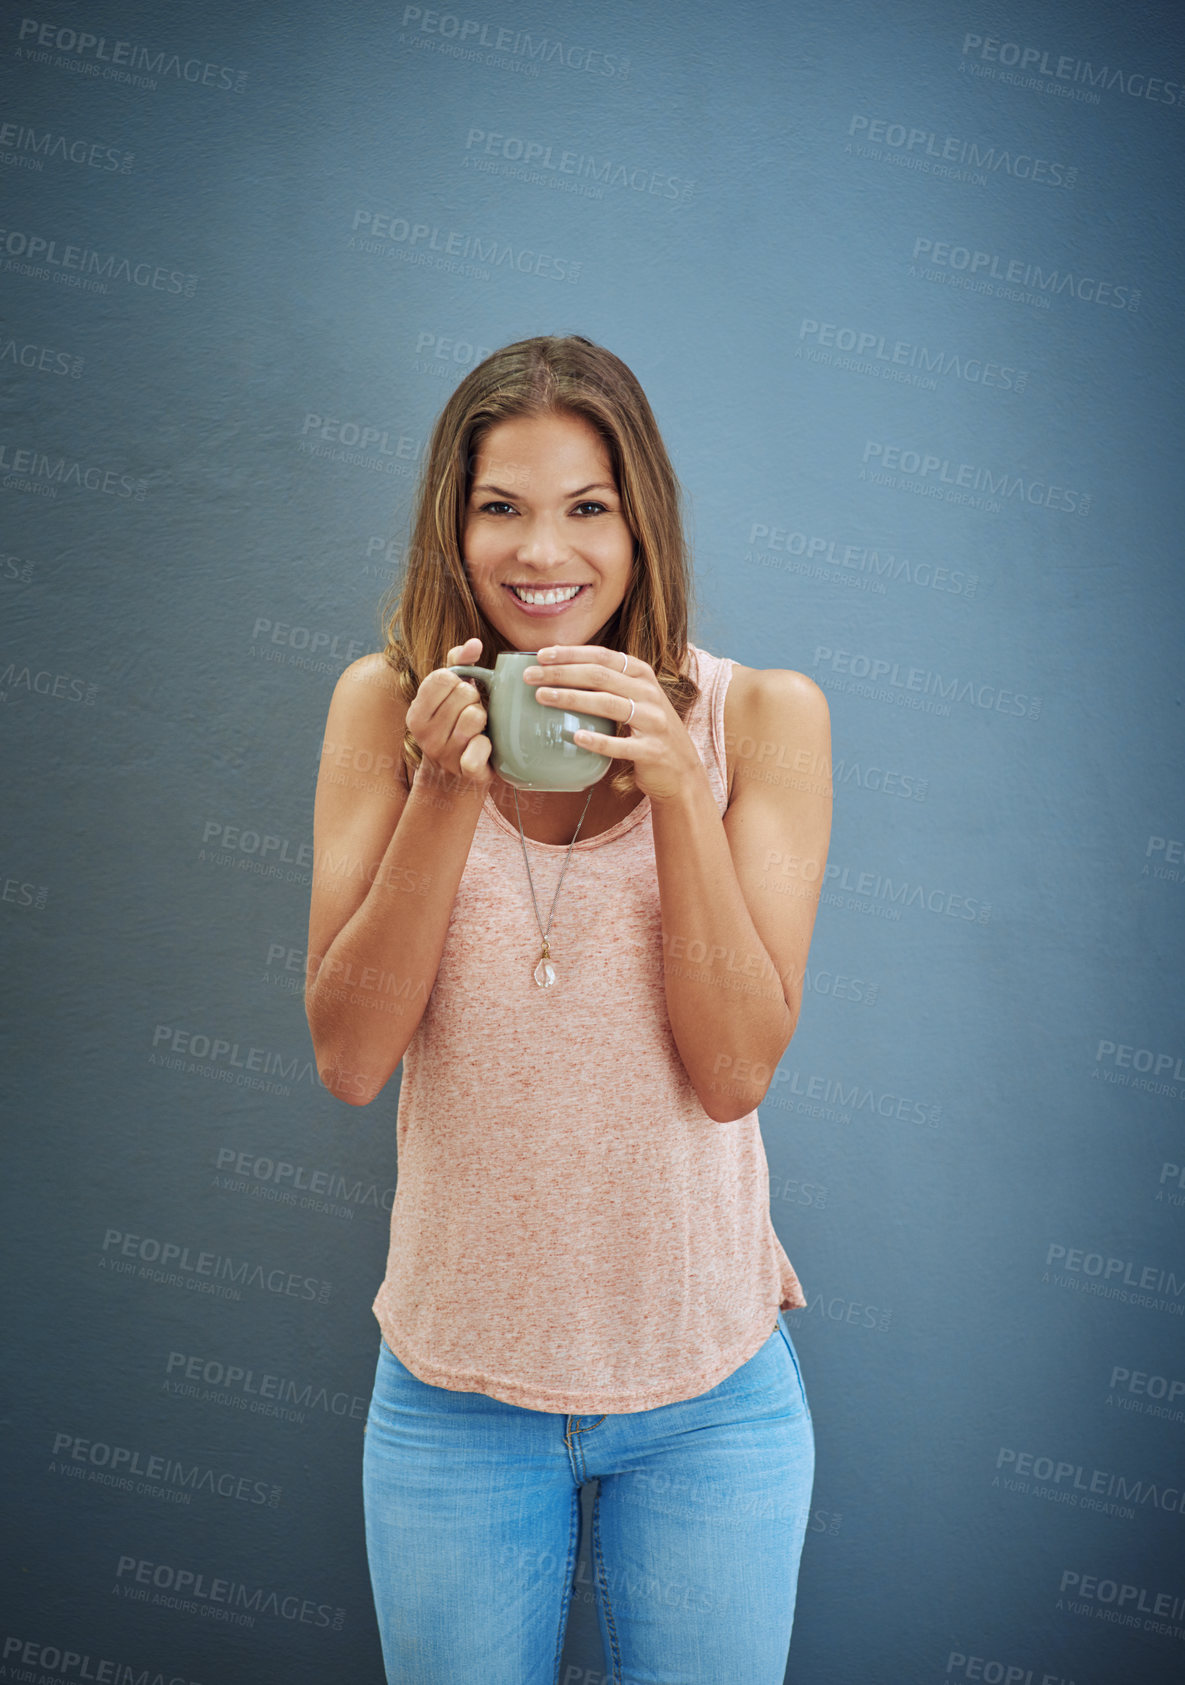 Buy stock photo Studio portrait of a young woman drinking a beverage against a gray background